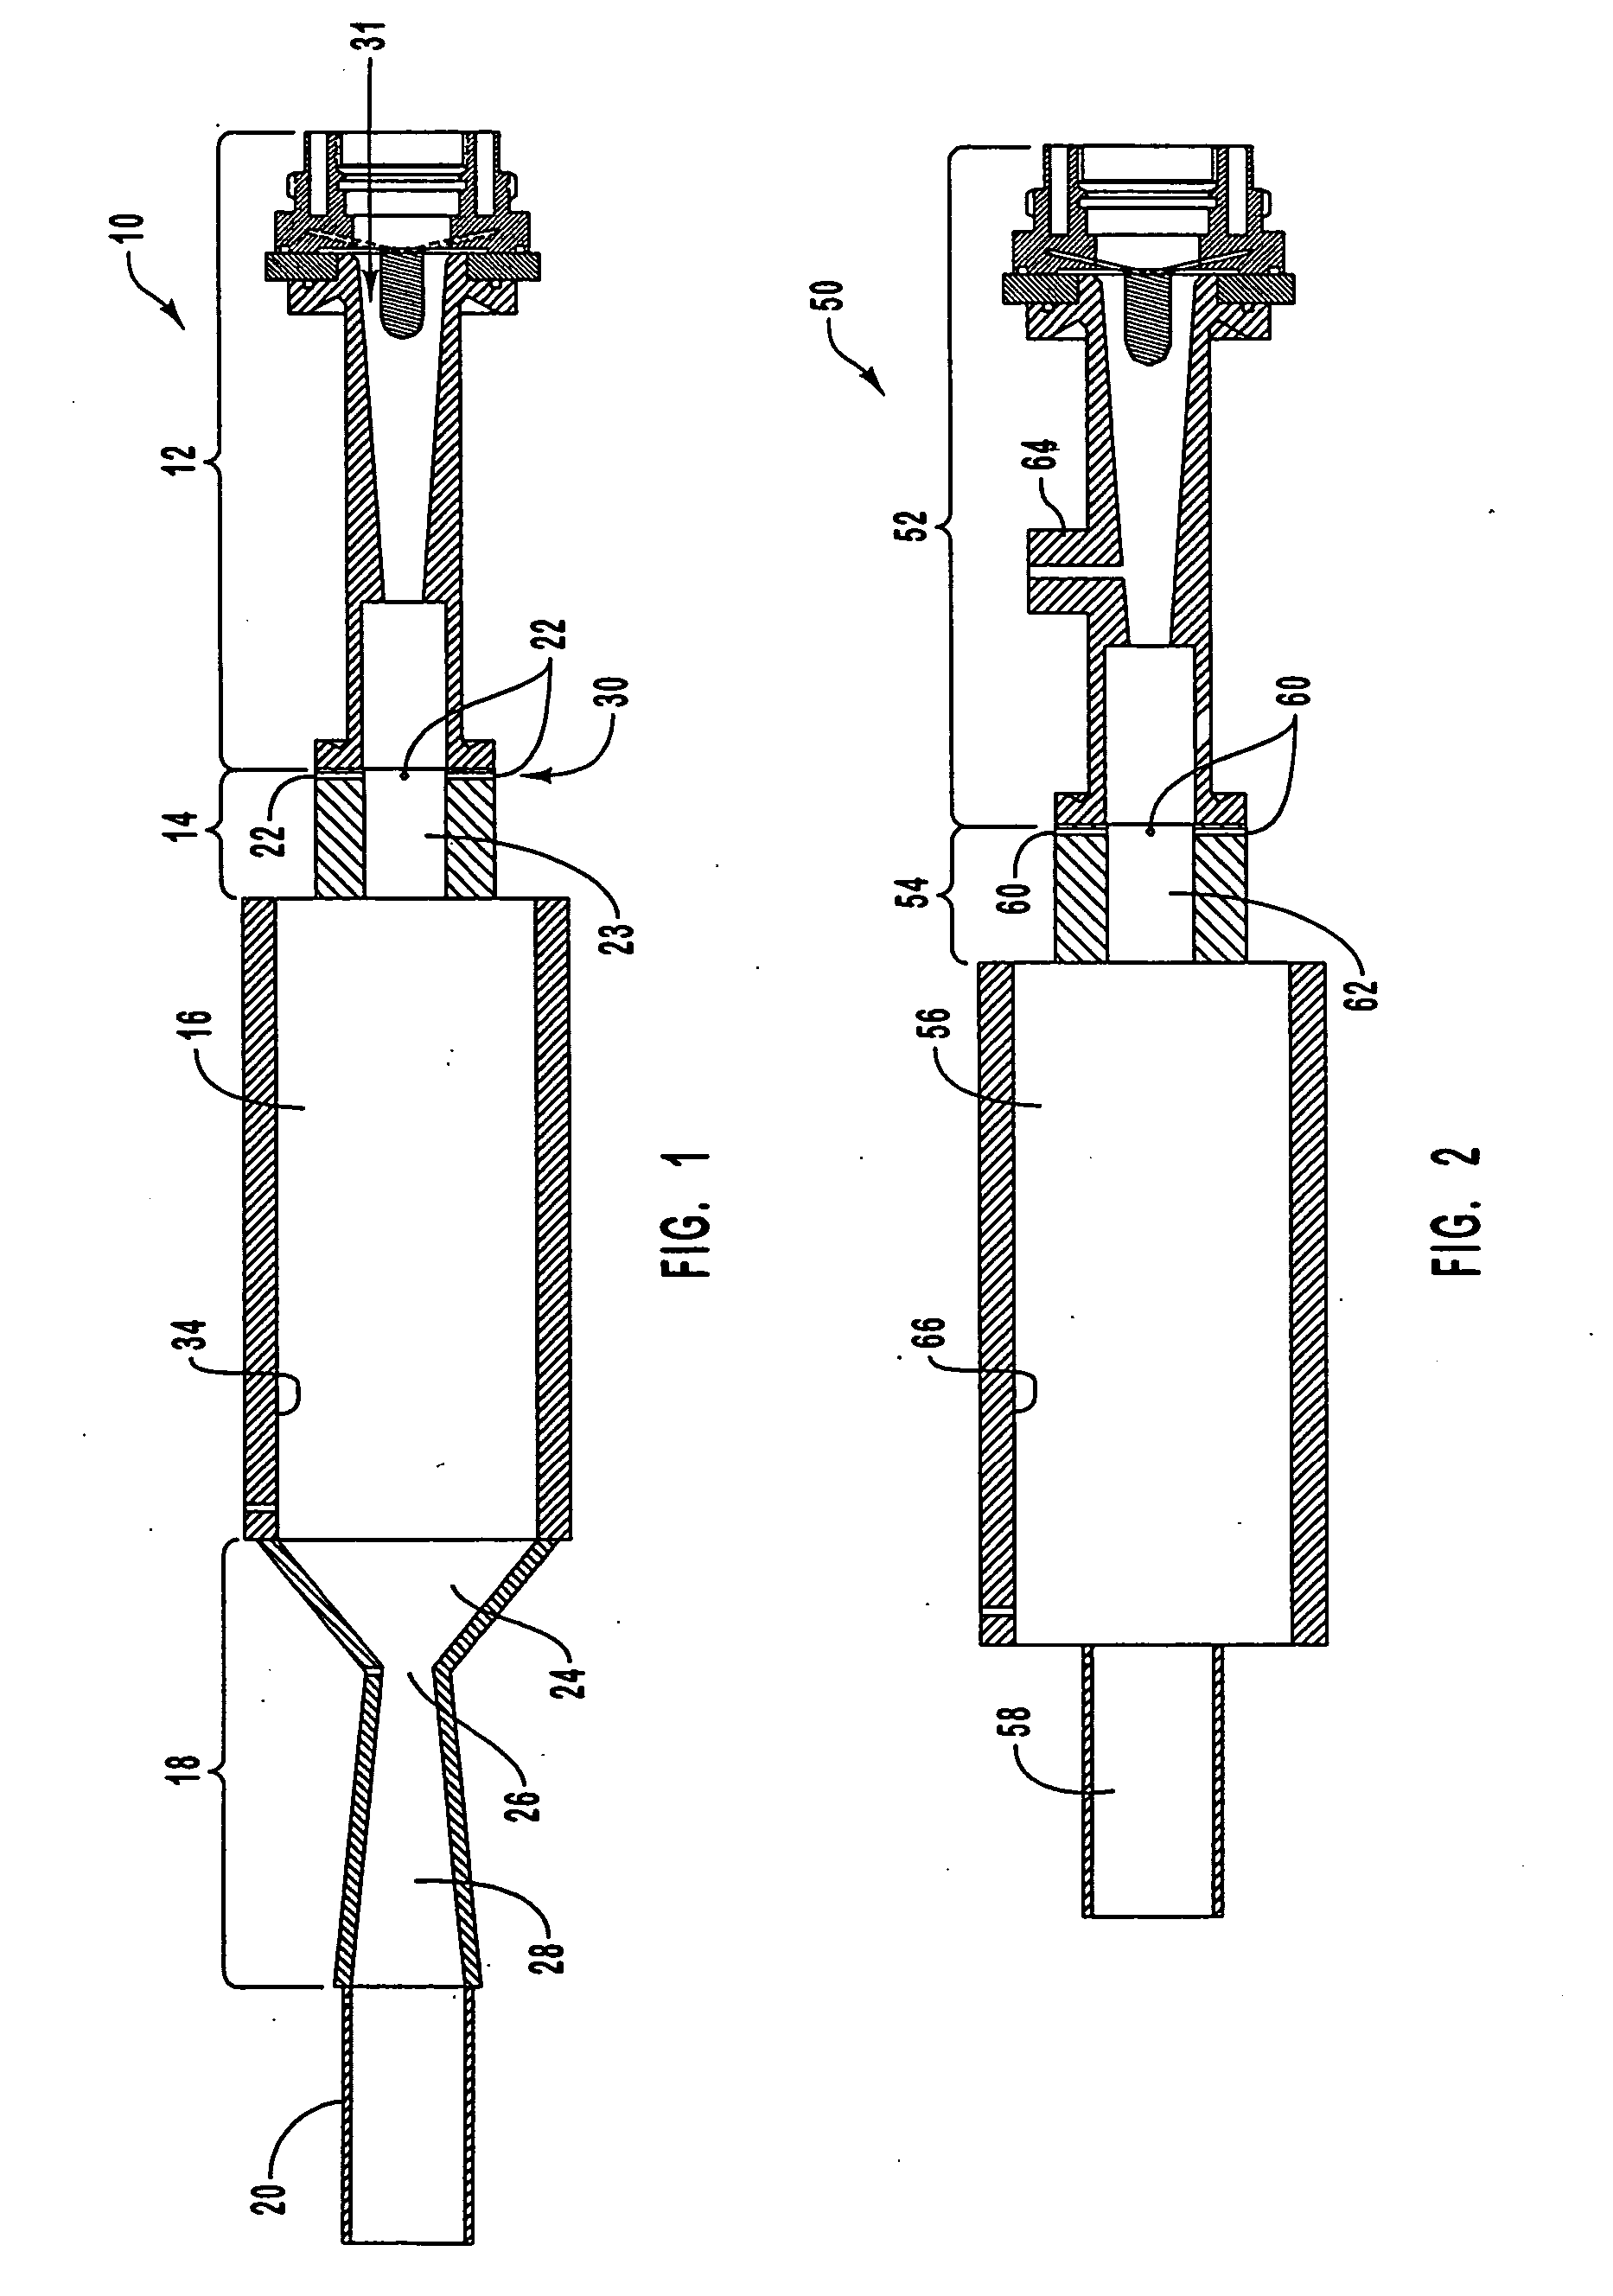 Thermal synthesis apparatus